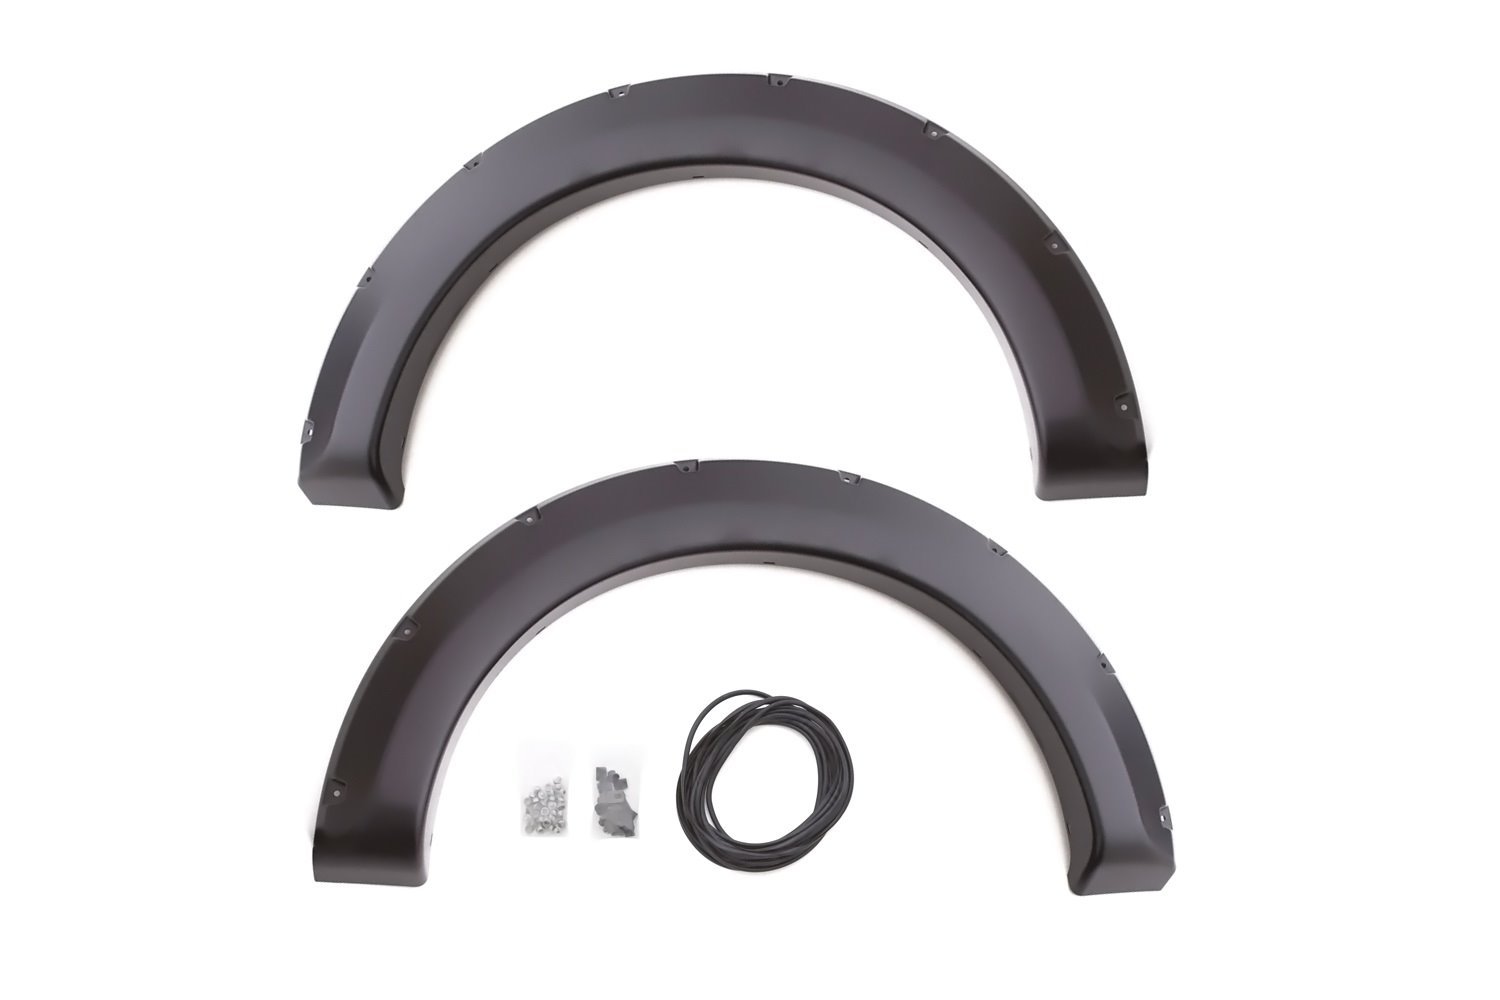 RX Rivet-Style Fender Flares 2011-16 Ford F-250/F-350 Super Duty